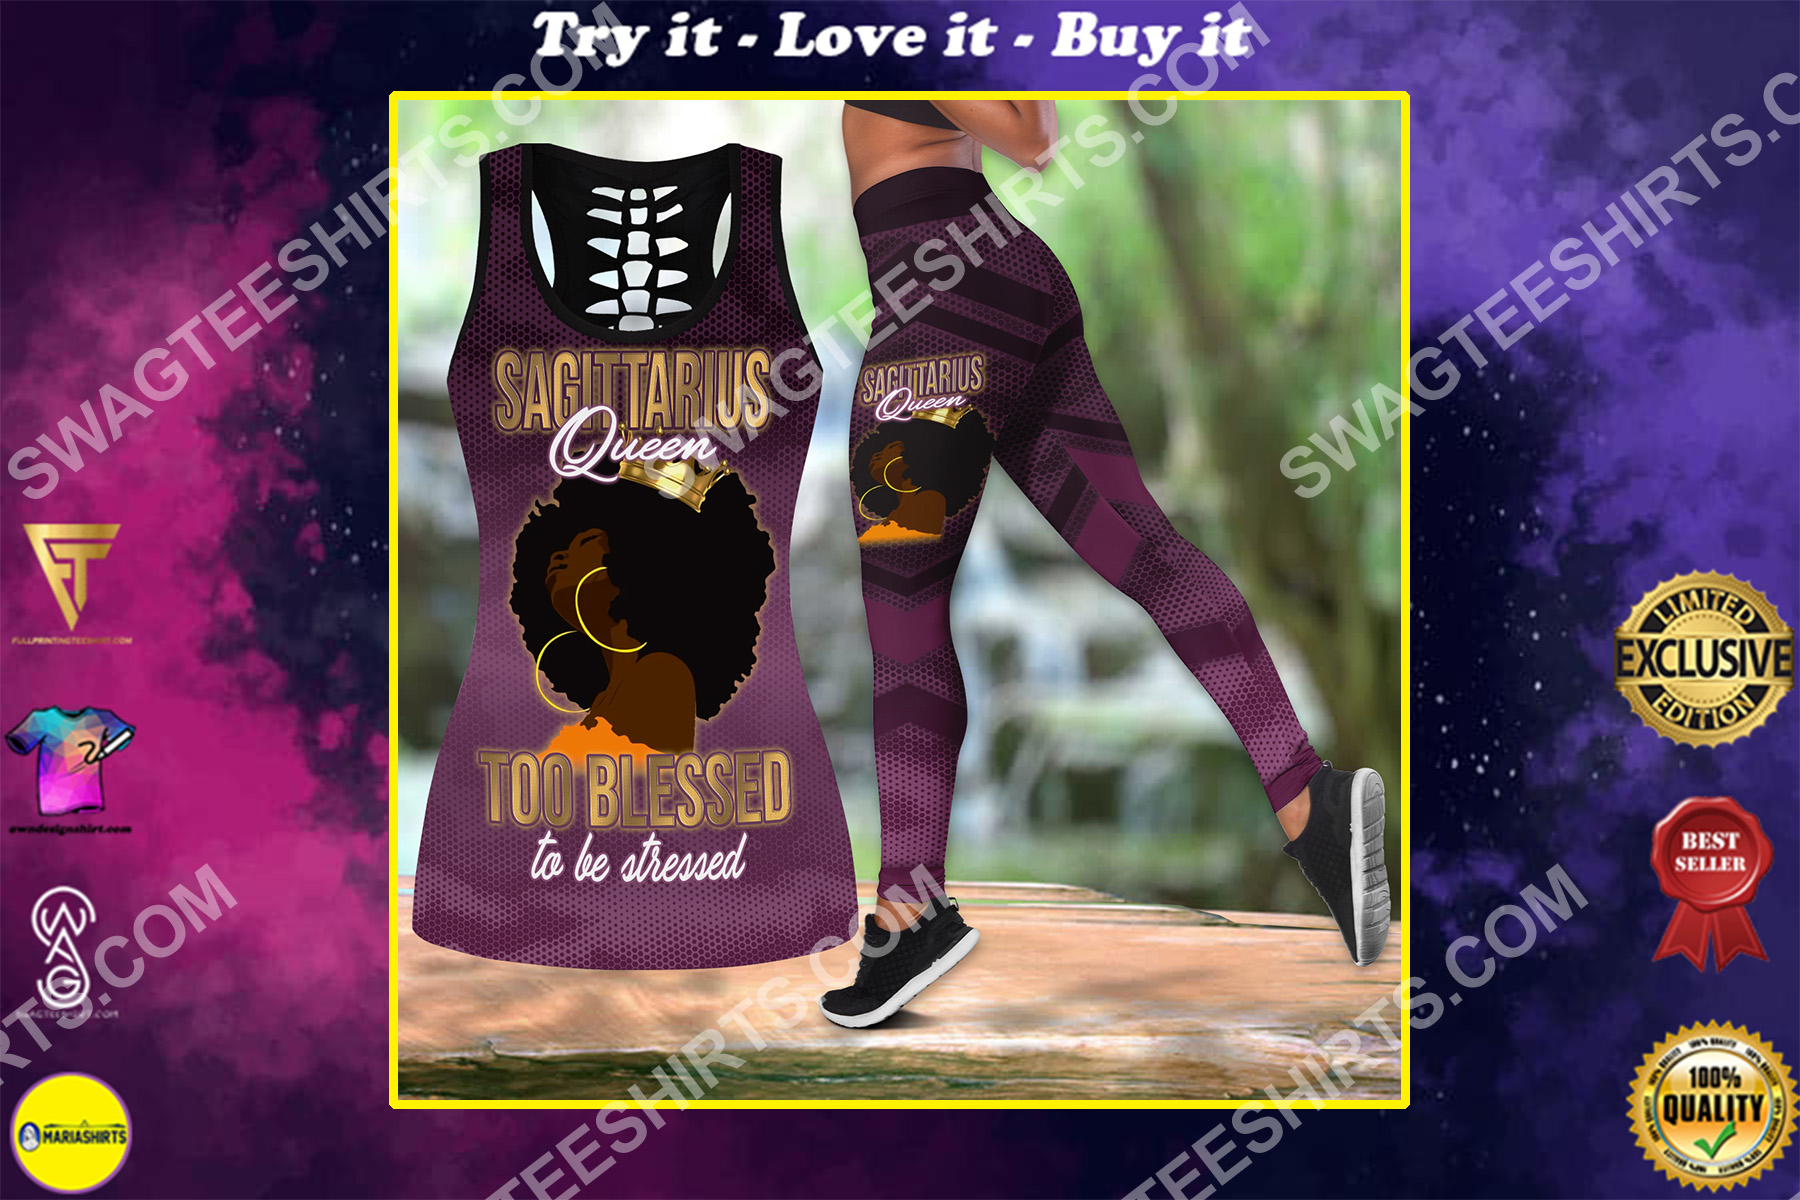 sagittarius queen too blessed to be stressed birthday gift set sports outfit